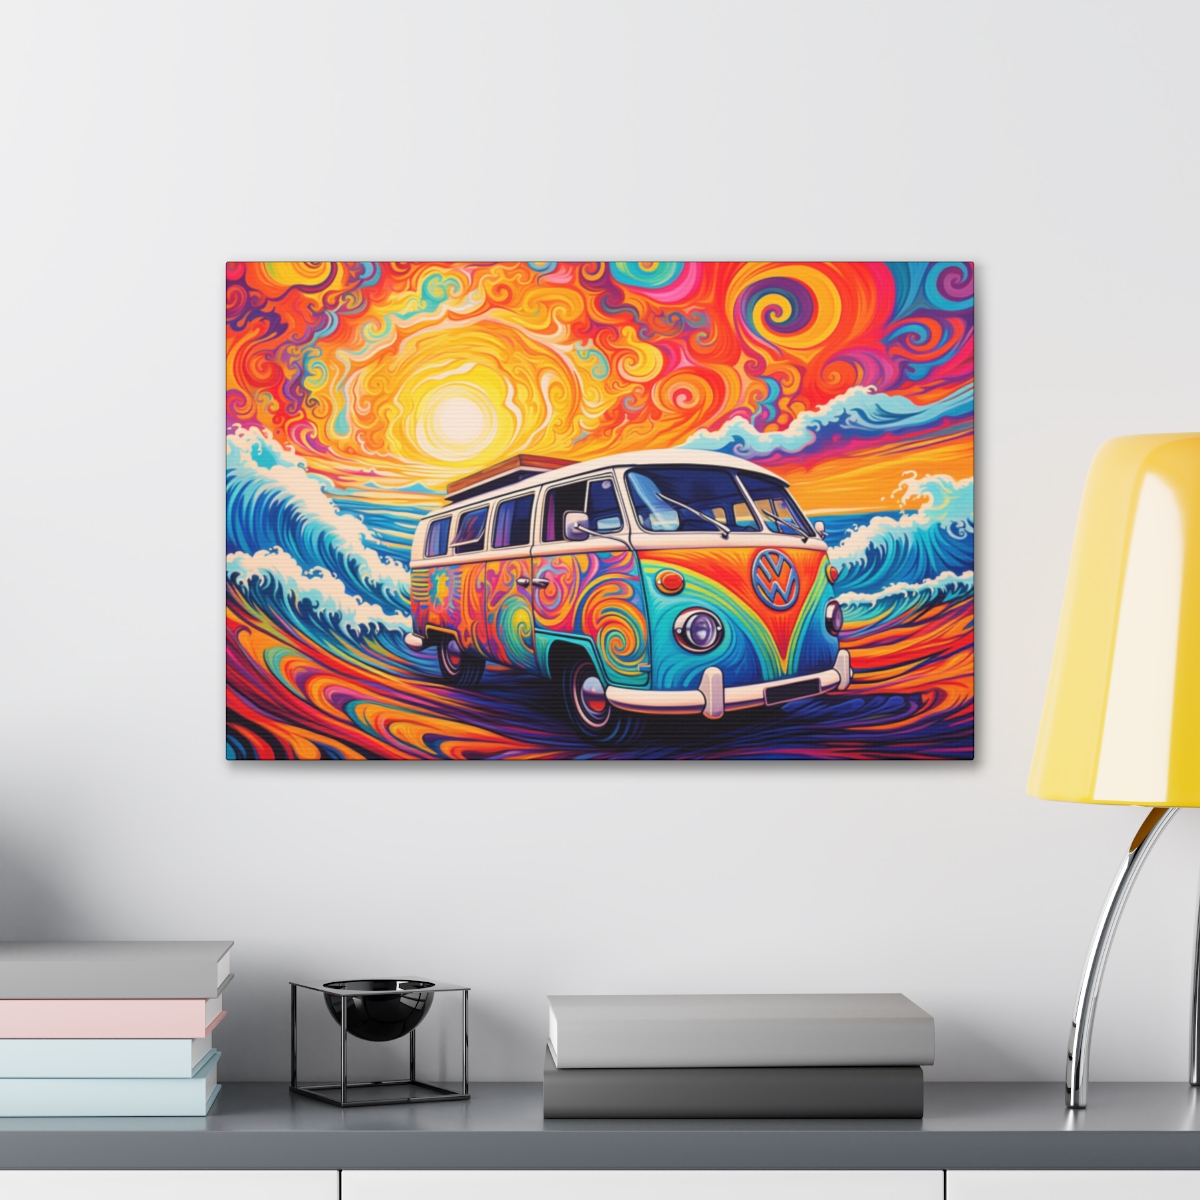 Hippie Van Art: Forget The So-called Rules